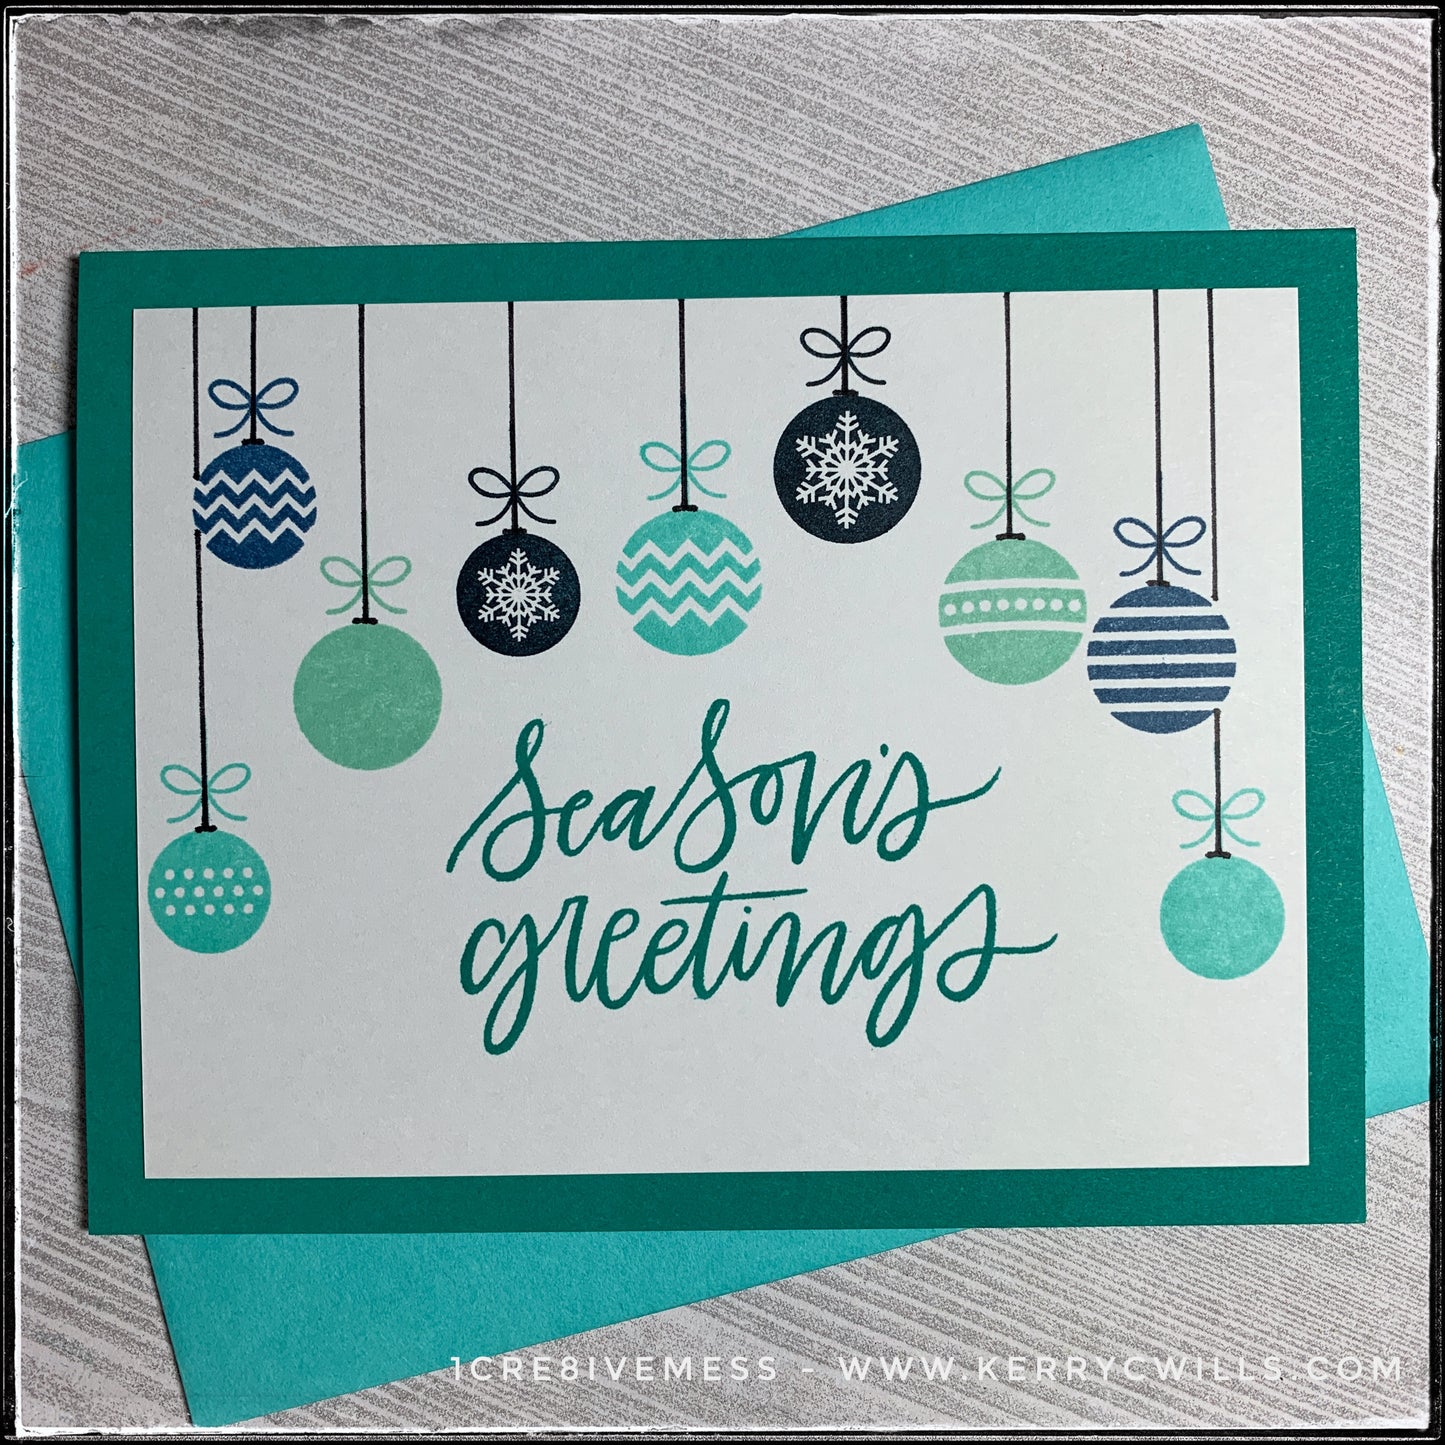 This handmade holiday card features the main sentiment "Season's greetings" which is stamped in a dark turquoise color, coordinating with the card base. A variety of patterned ornaments hang from the top of the panel, surrounding the sentiment. The ornaments are stamped in shades of aqua, turquoise and navy blues, while hand drawn black strings reach to the top of the card panel as if they are really hanging. A turquoise envelope is included and layered beneath the card. 